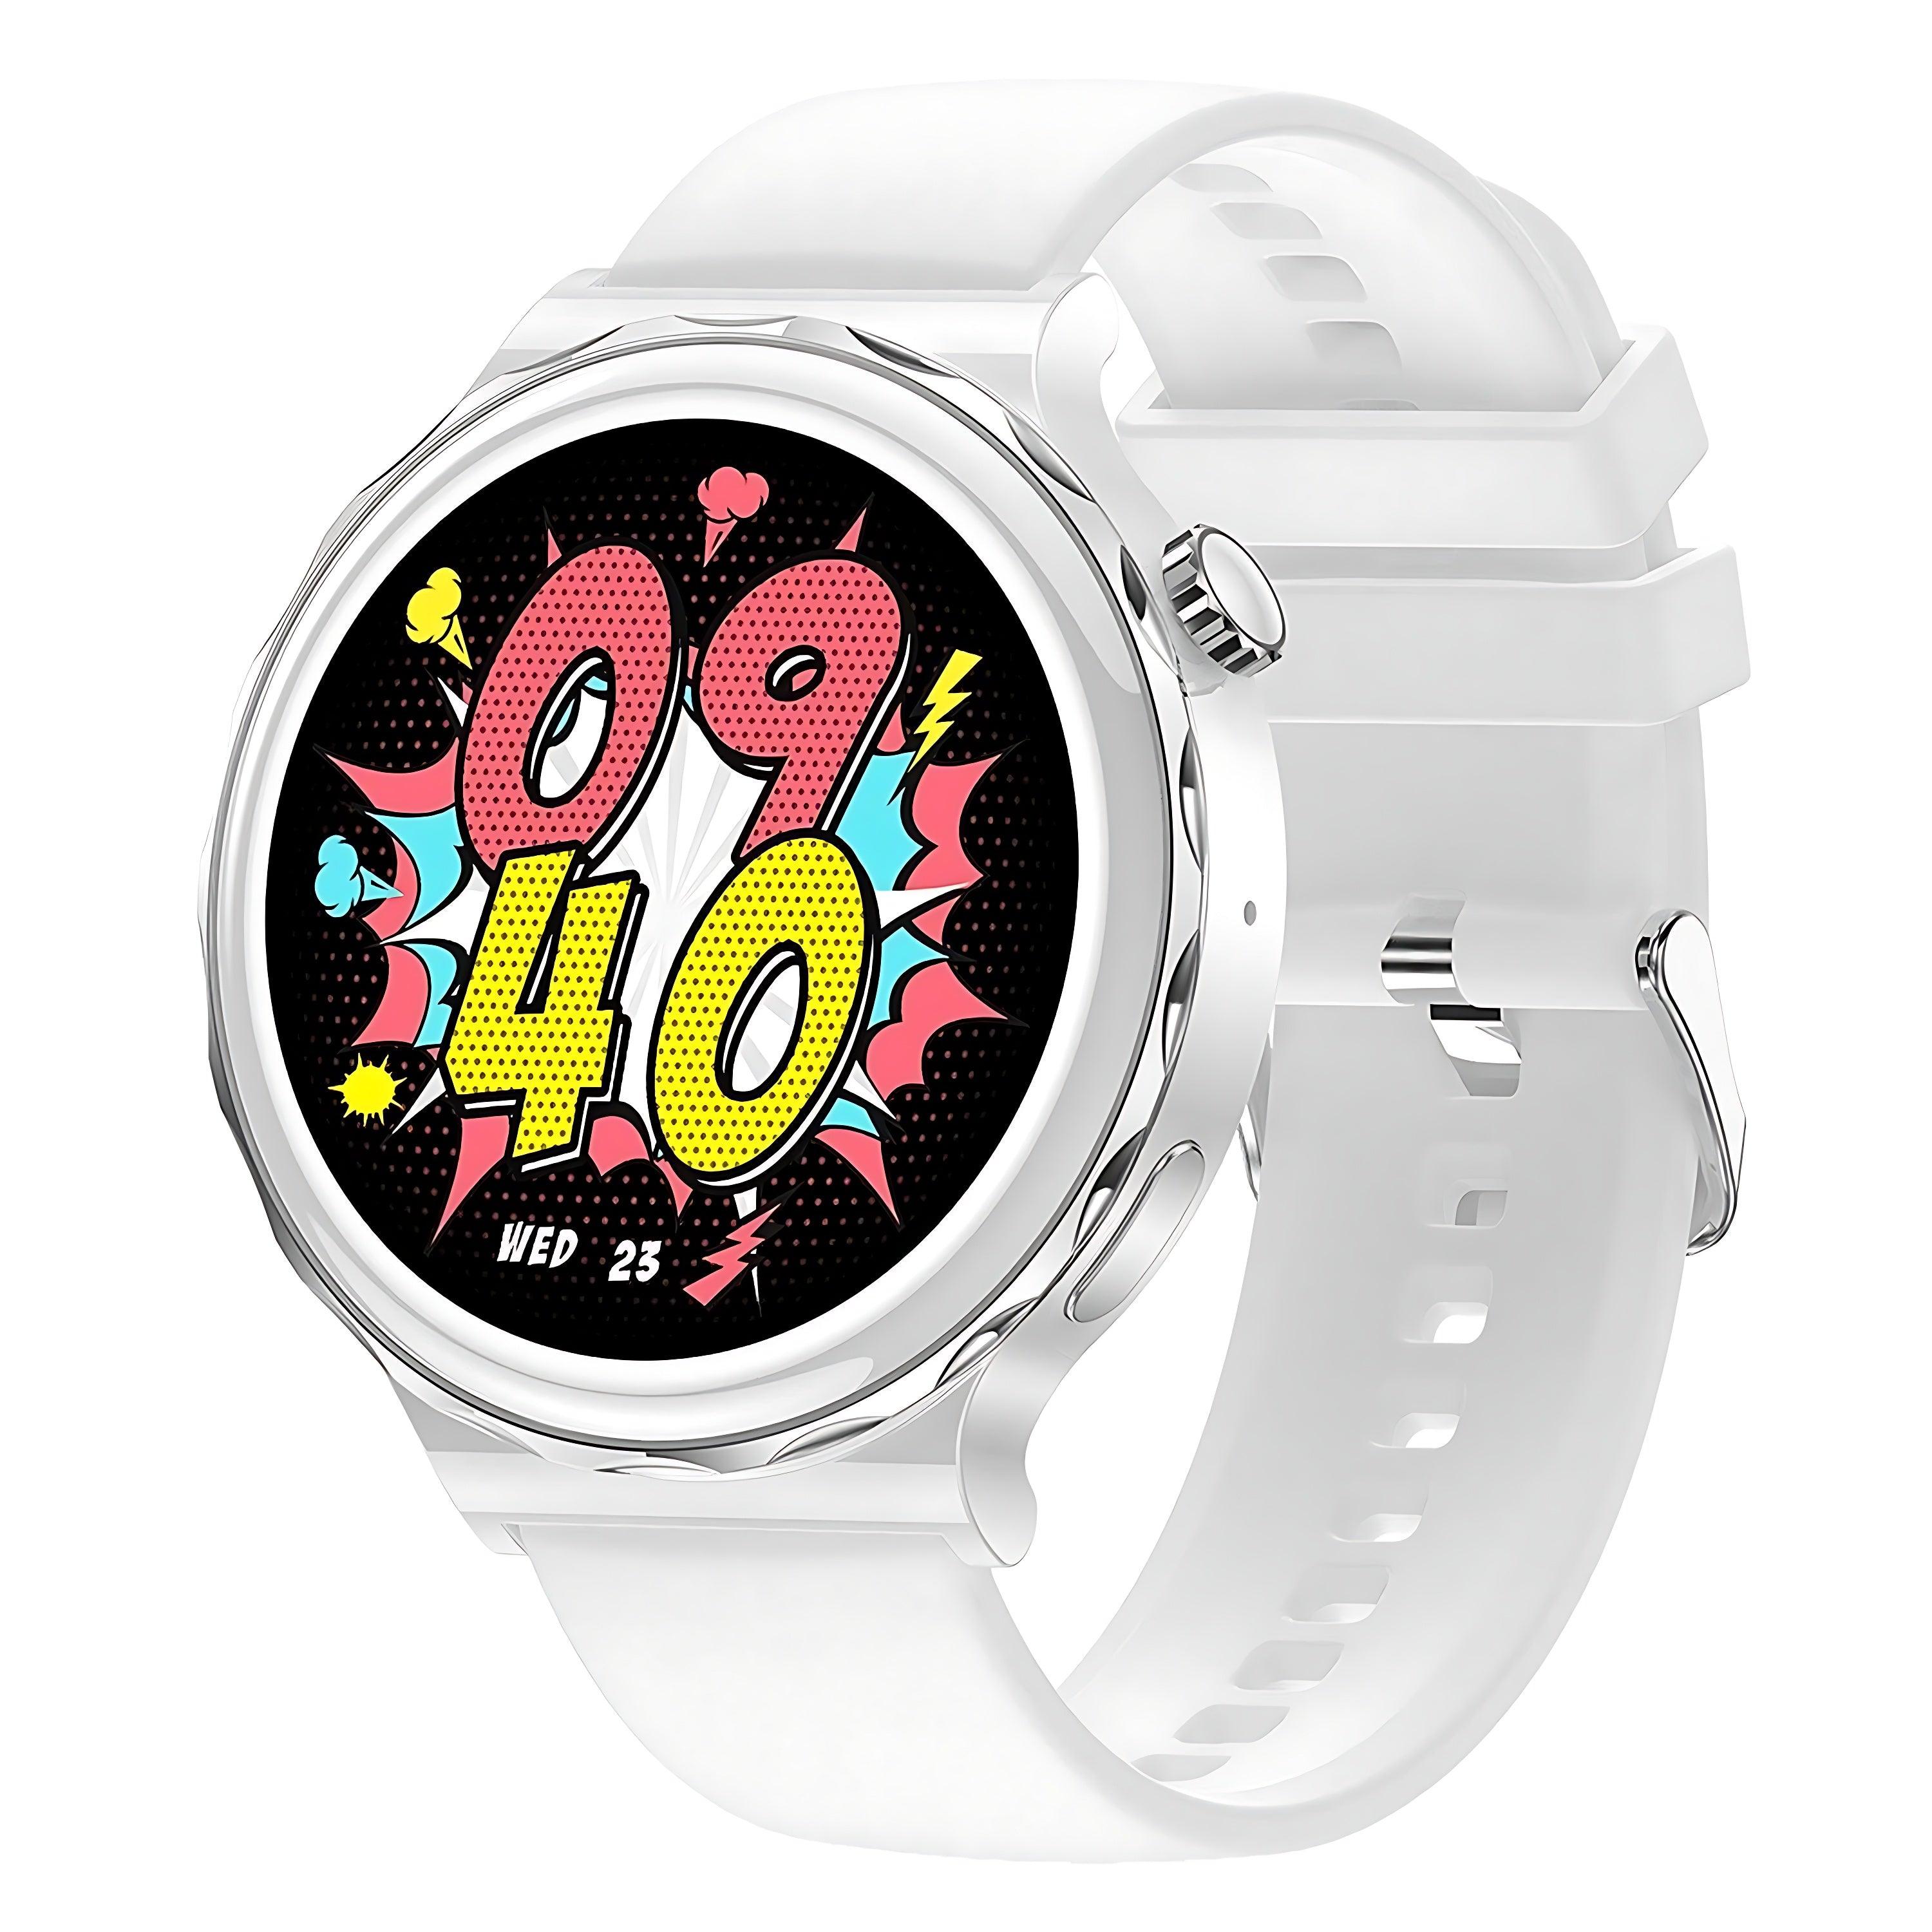 Kids Smartwatches - Touchy Style .